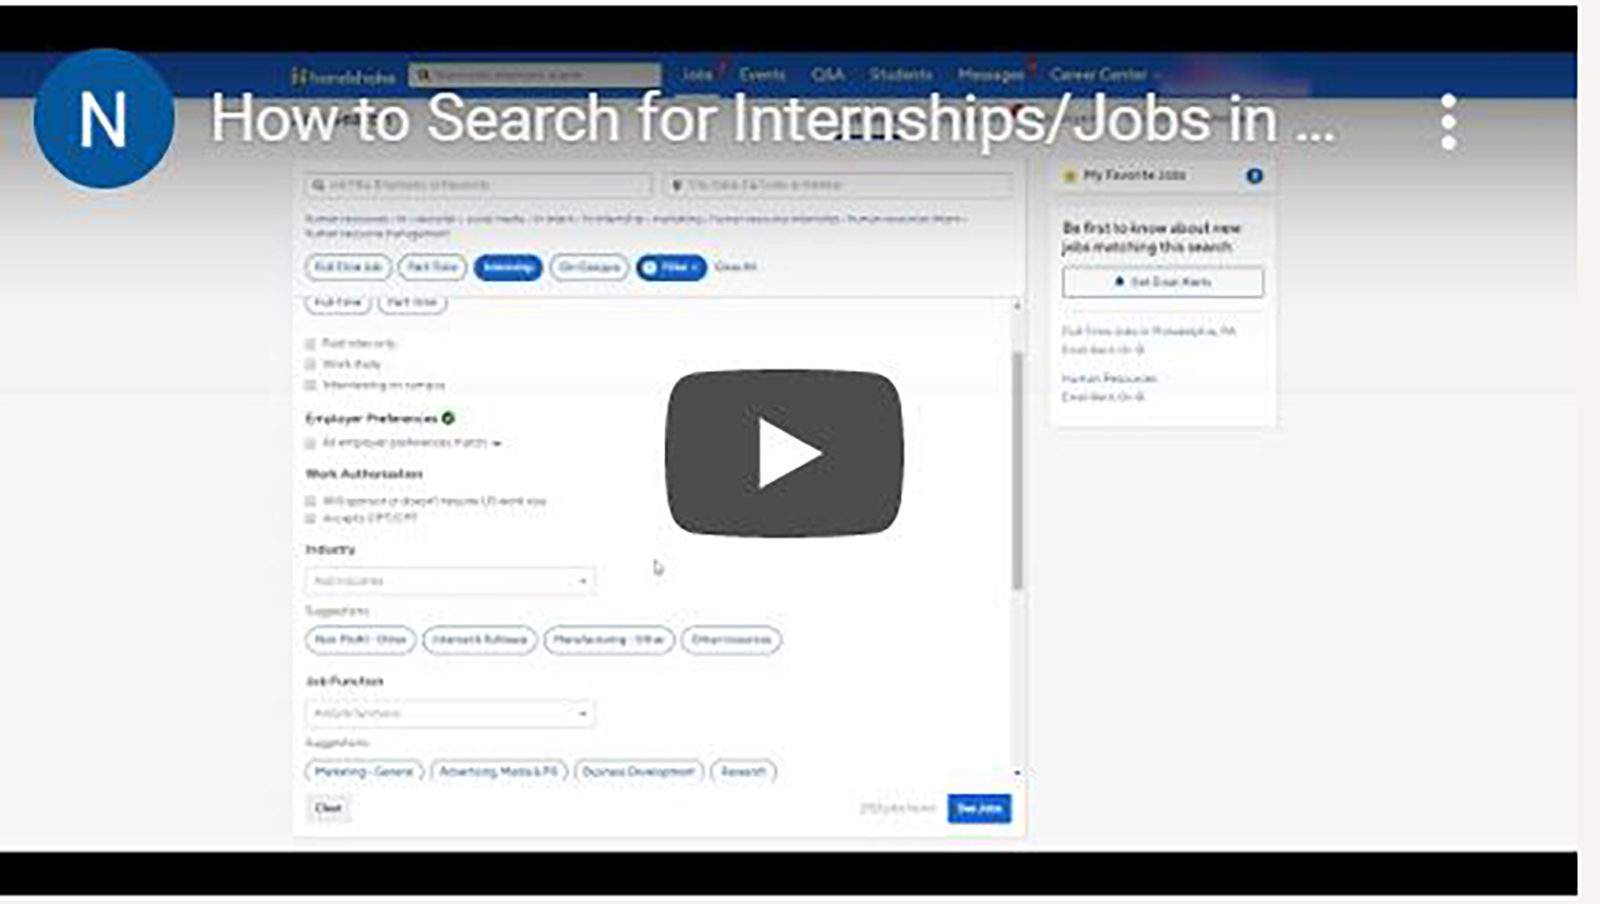 How to Search for Internships/Jobs in Handshake